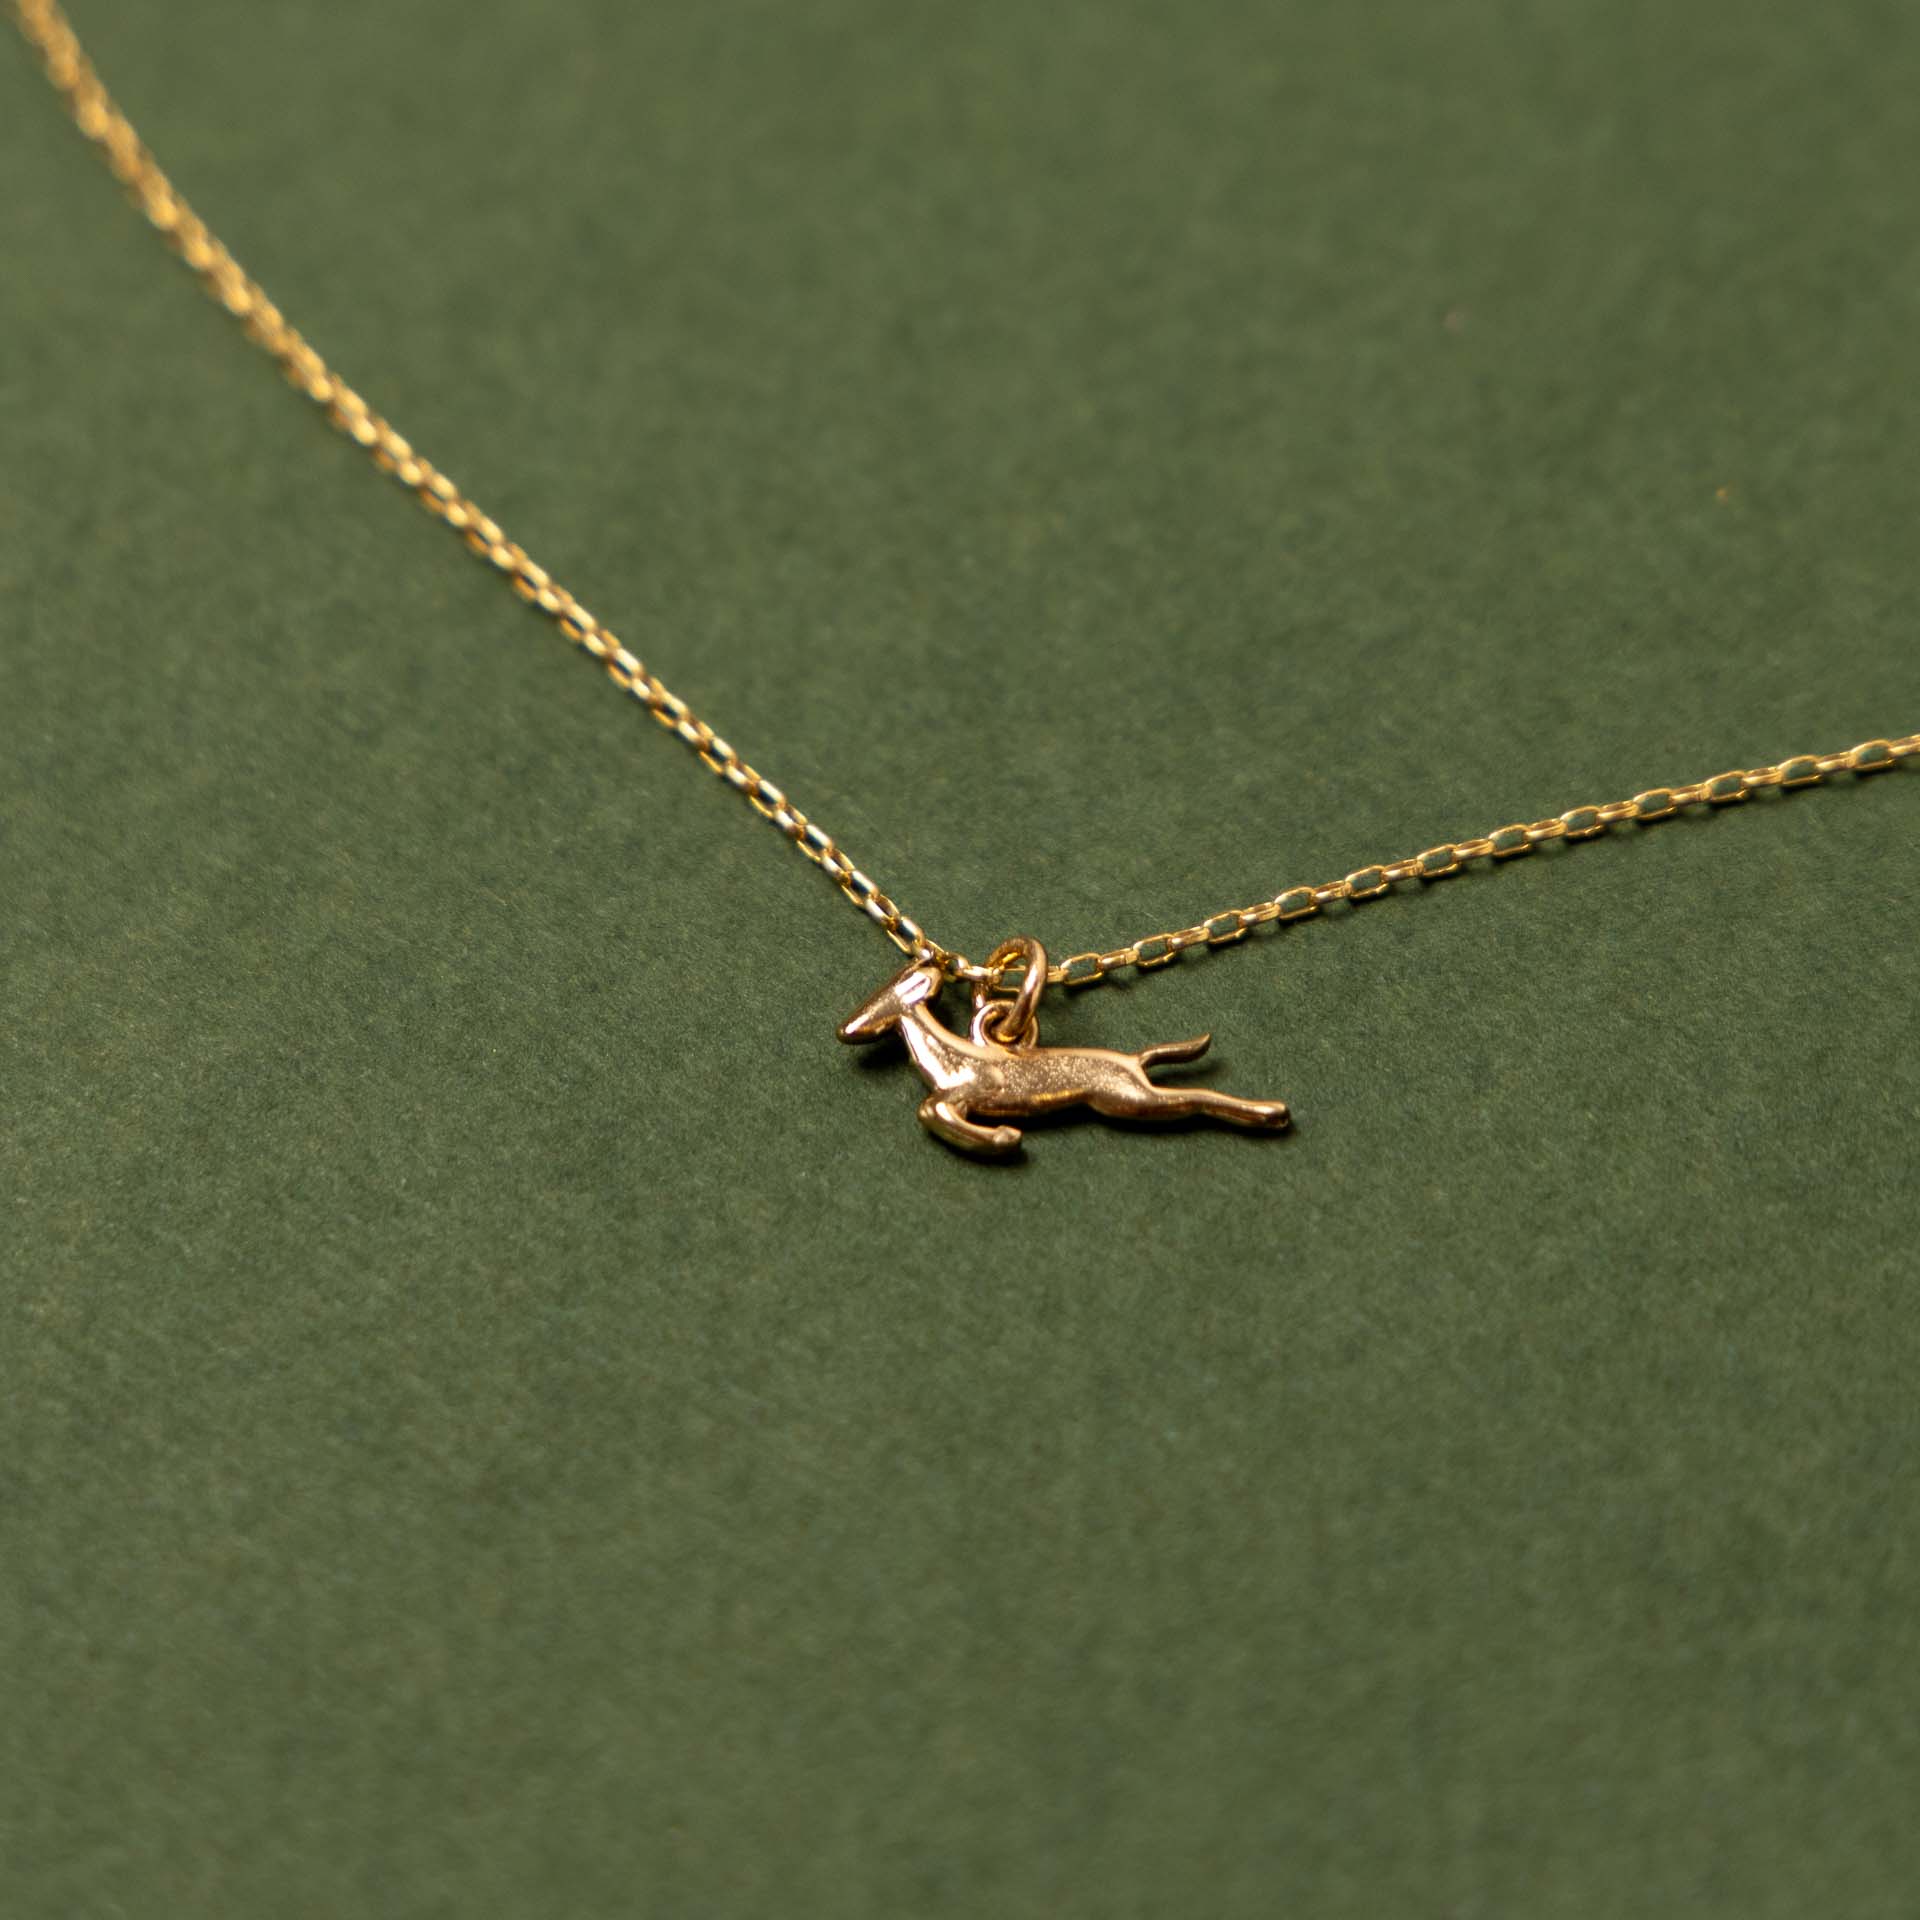 "I Love South Africa" Gold-Plated Dainty Springbok Necklace